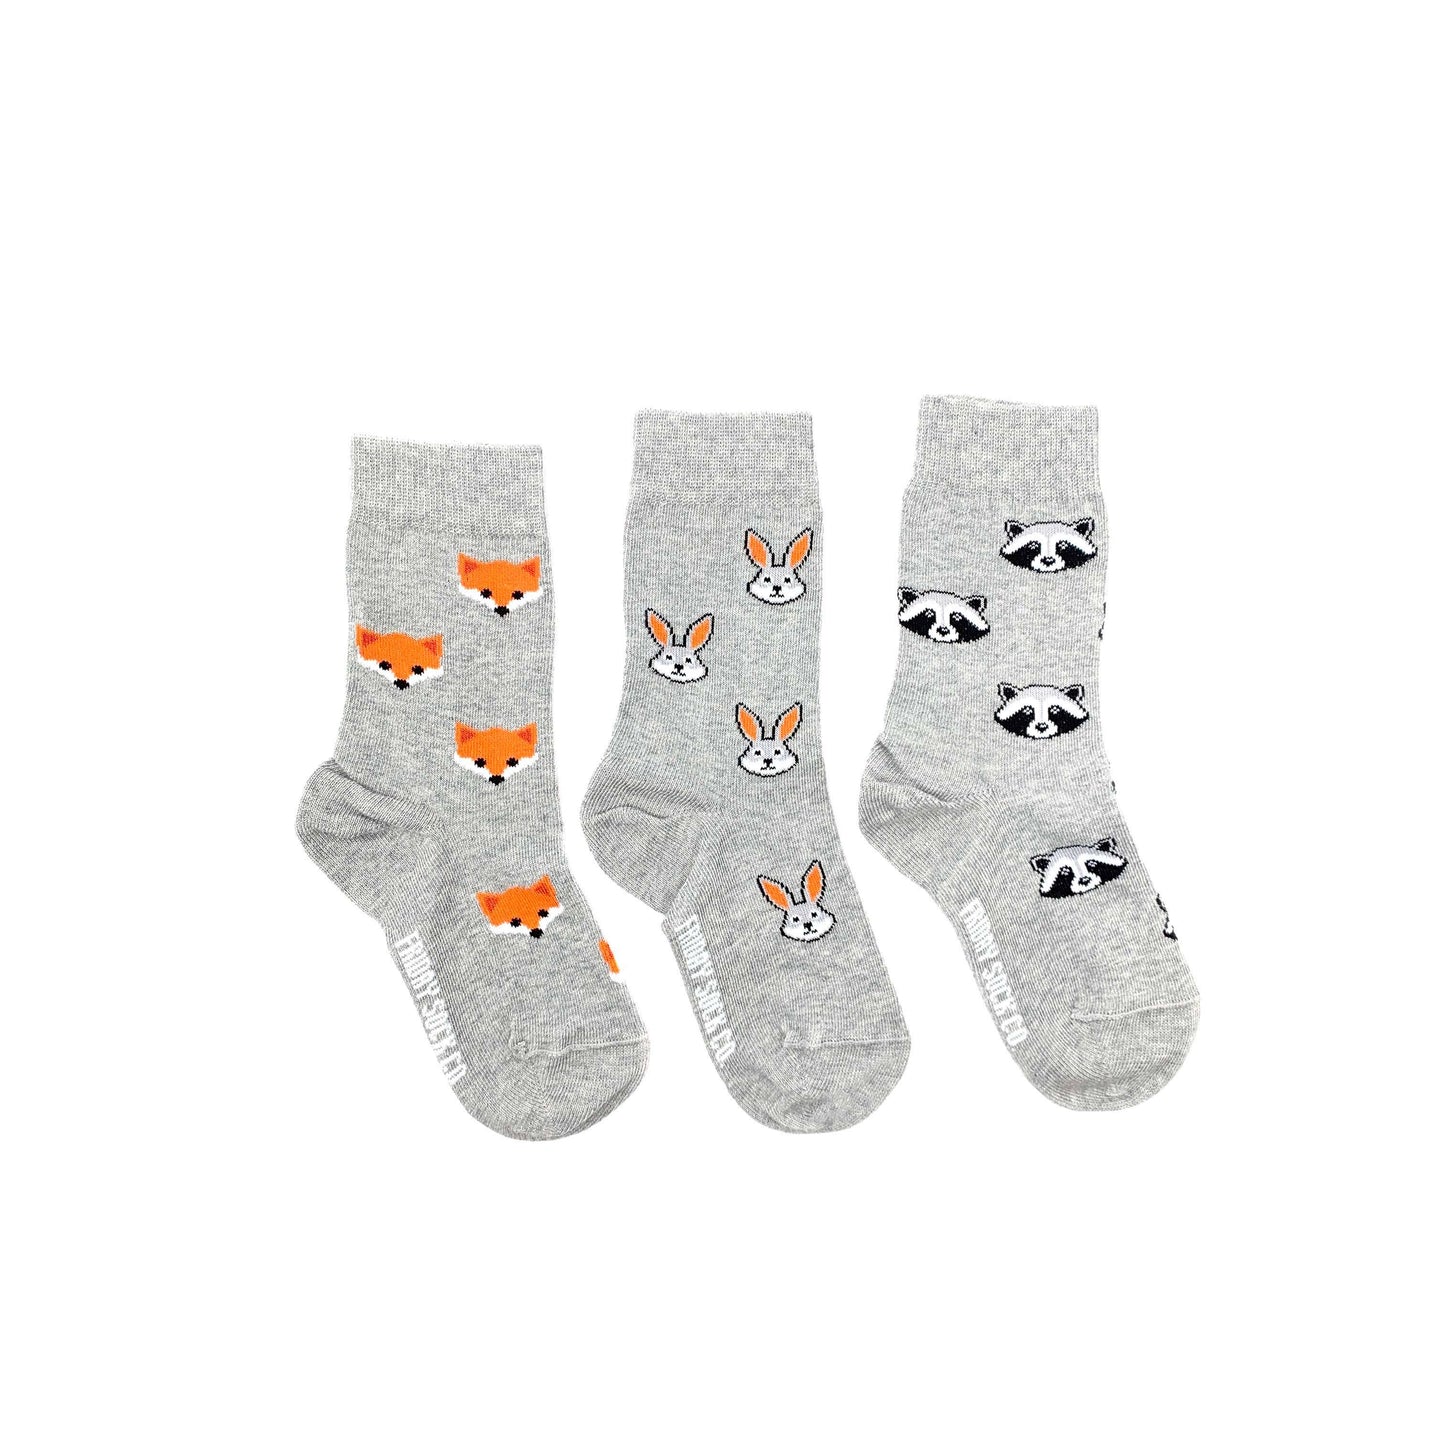 Kid’s Socks | Fox, Rabbit and Racoon | Ethically Made